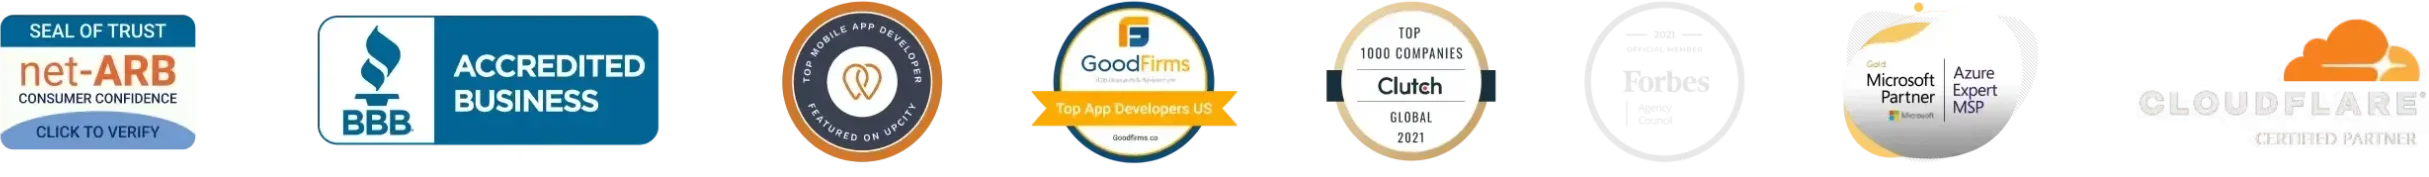 Partners logo footer